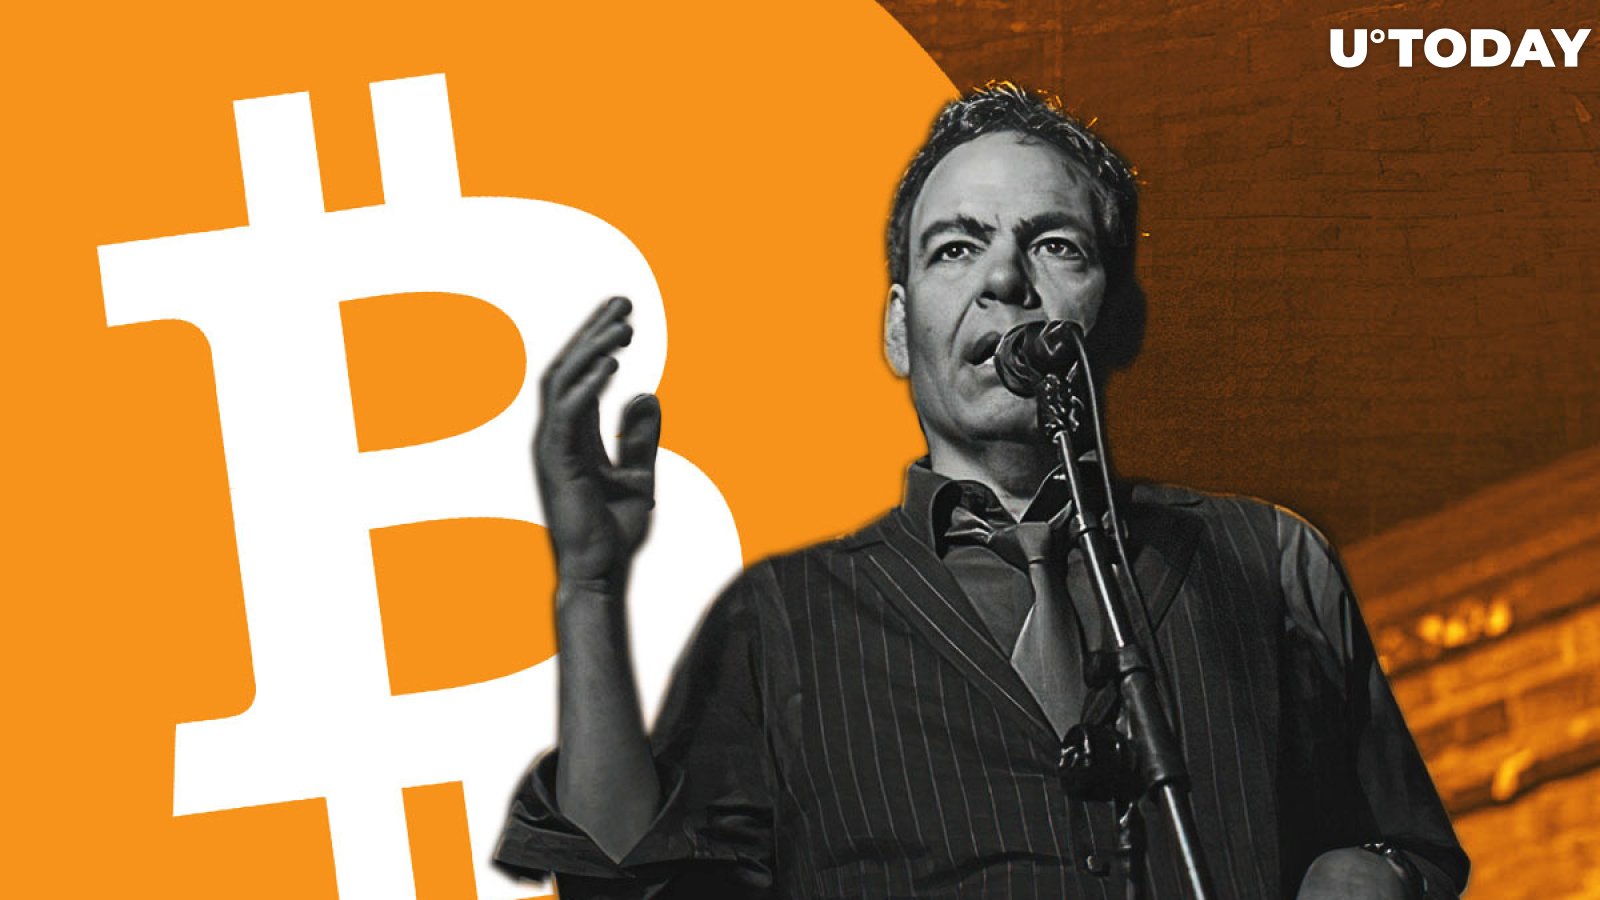 Capital Flight Out of Asia Is Taking Bitcoin Express: Max Keiser